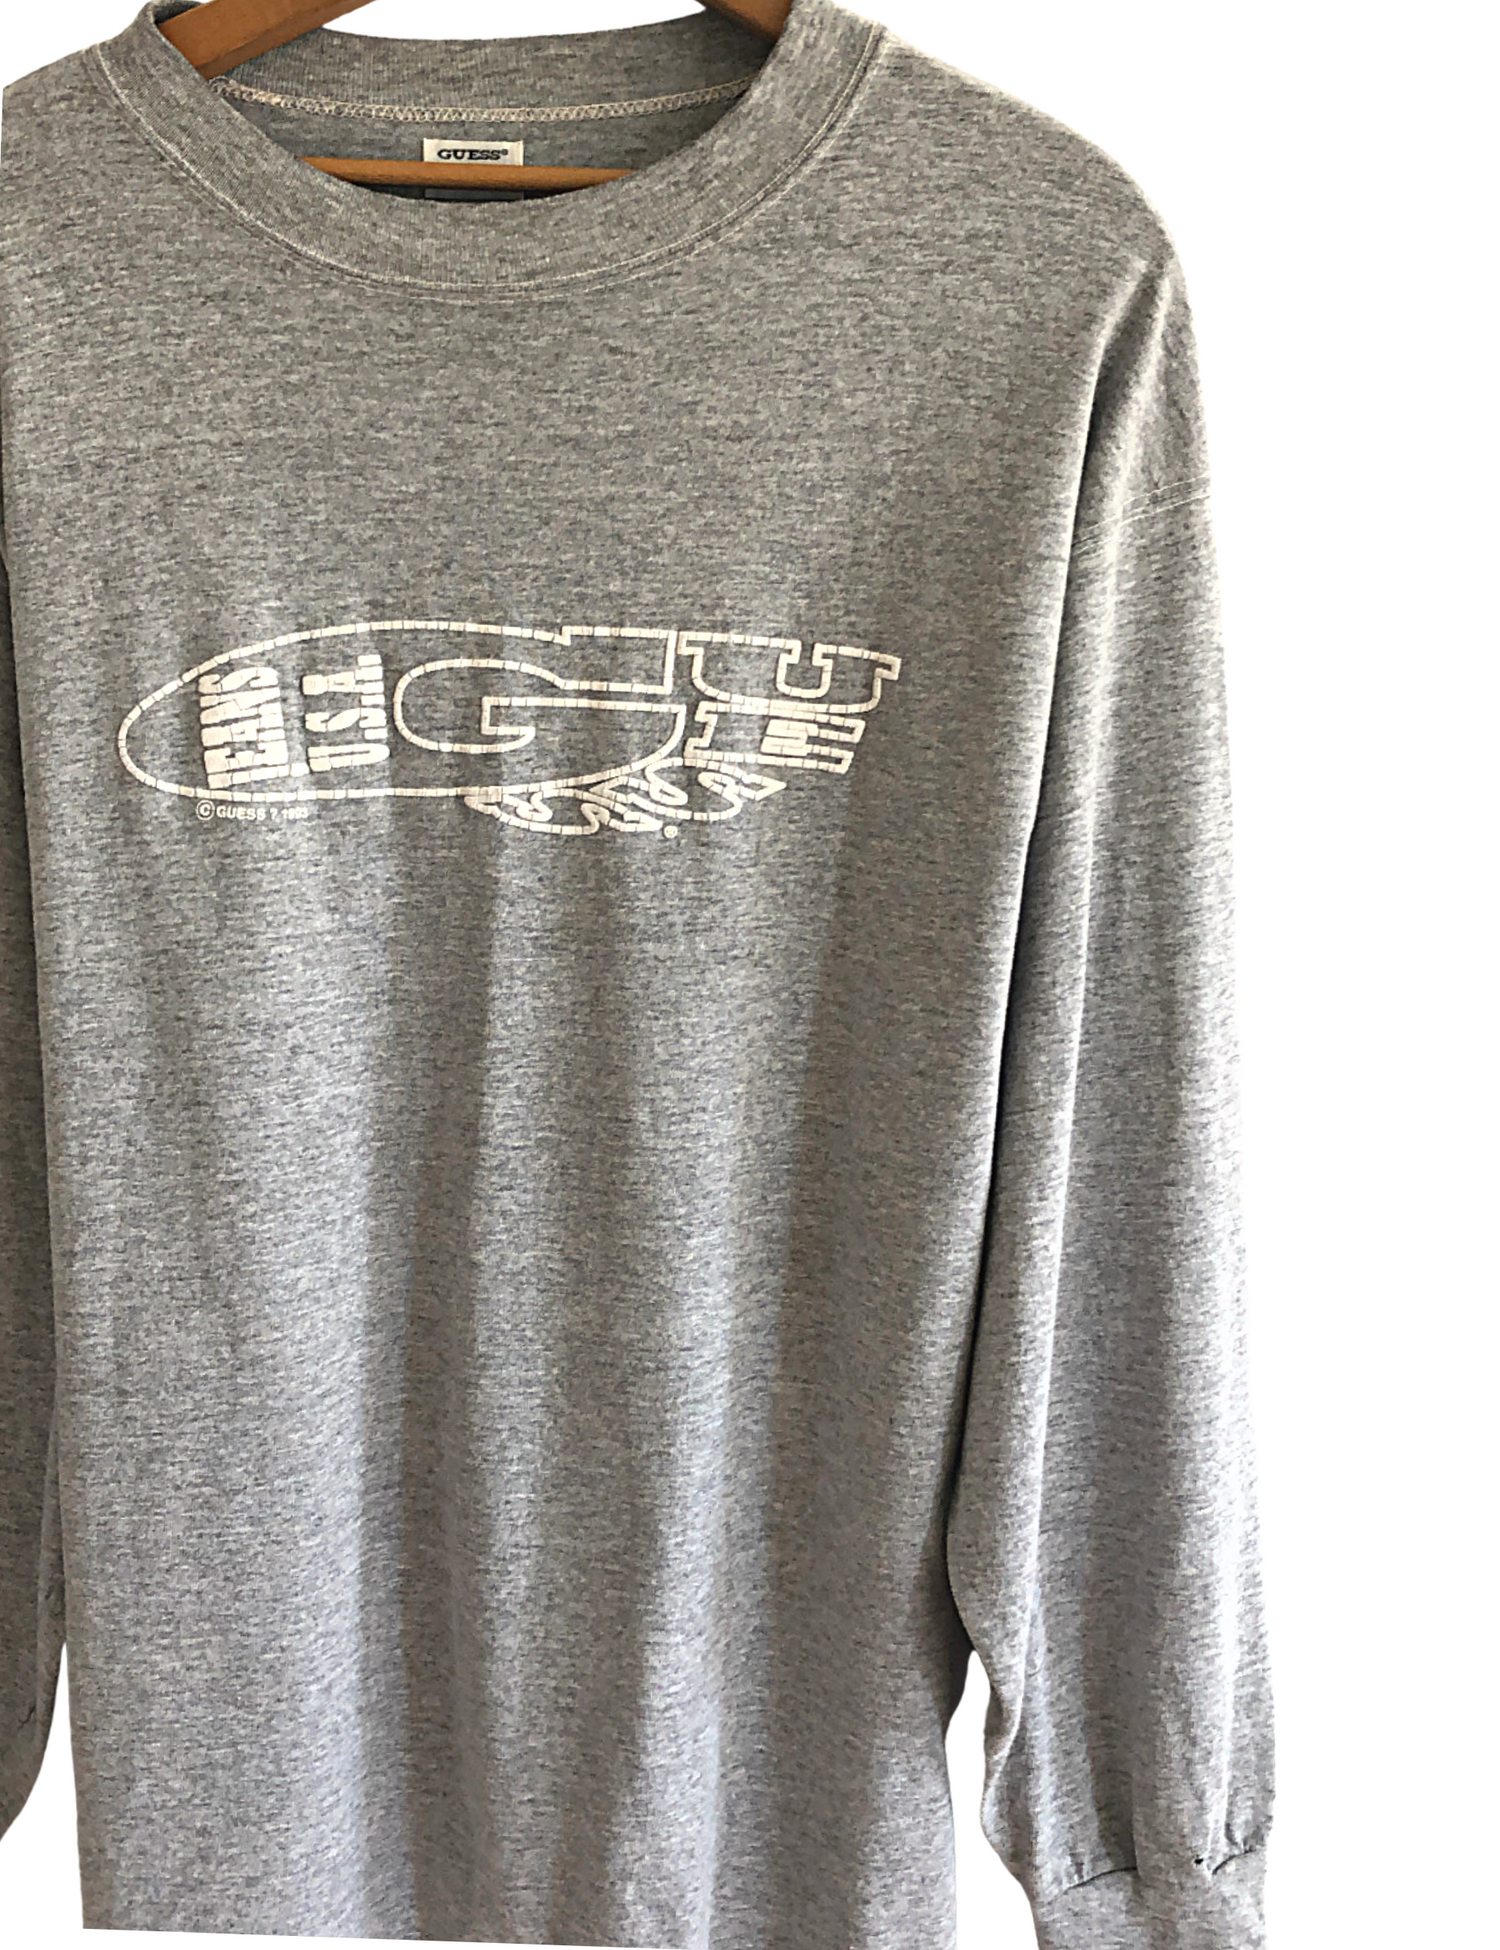 Høre fra Tomhed rulletrappe 93 GUESS JEANS USA Light Grey Heather Long Sleeve Tee Size X-Large – Fresh  to Death Vintage